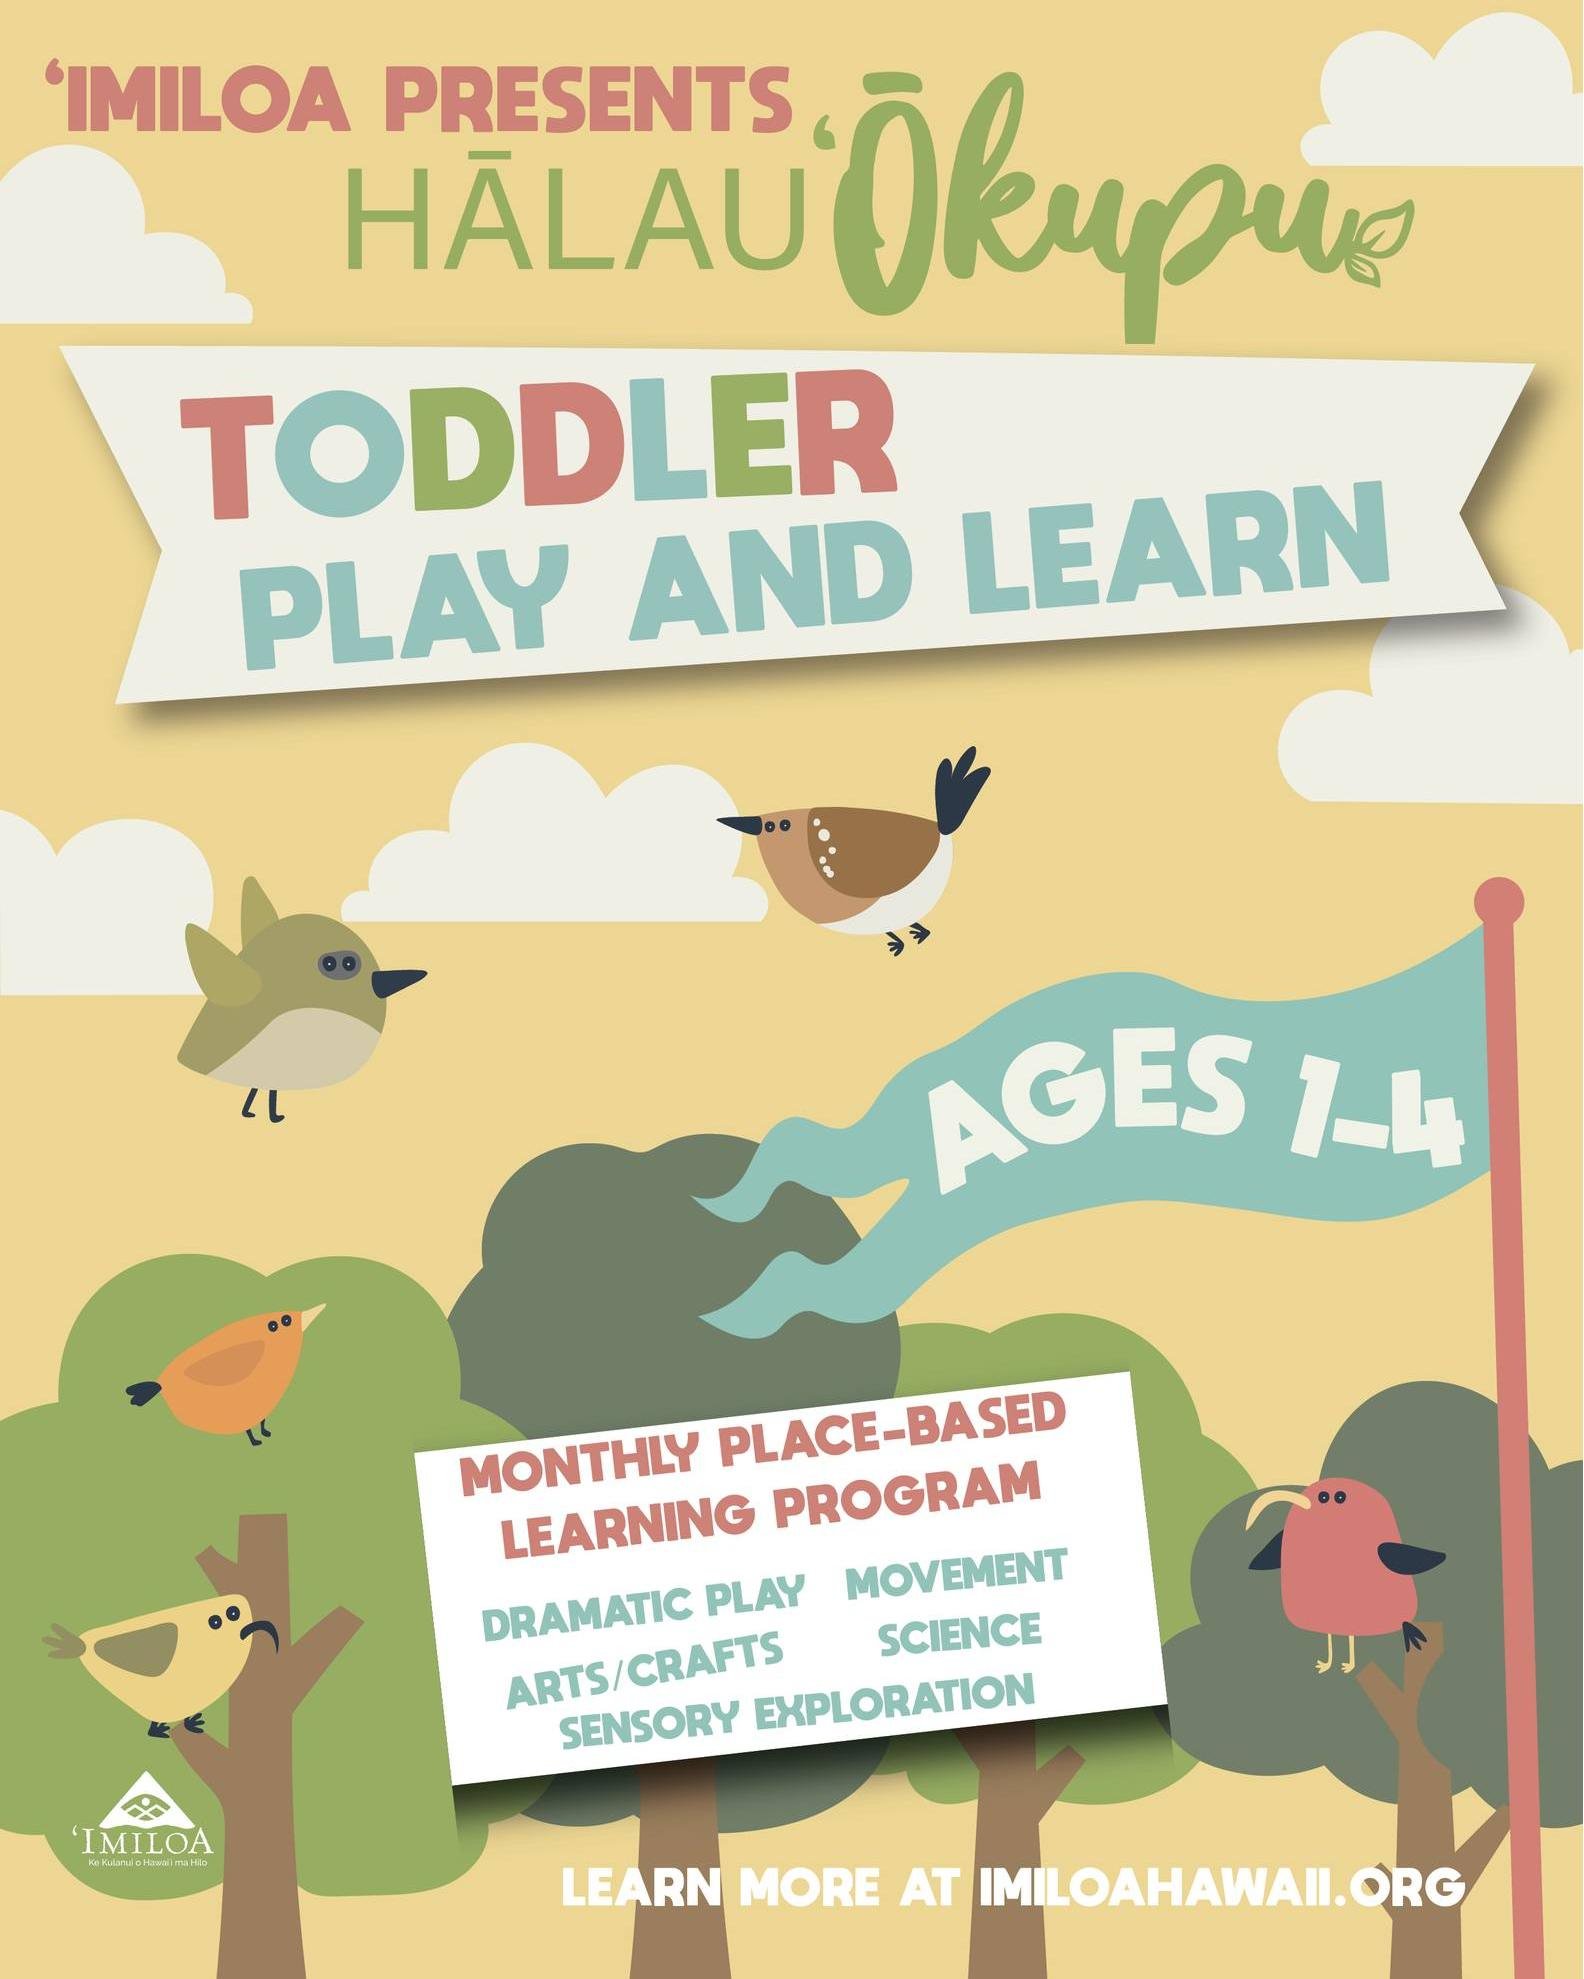 We are excited to announce the launch of Hālau ʻŌkupu Play and Learn &mdash; a unique Place-based and Play-Based Enrichment Program designed for keiki (ages 1-4) and their caregivers. 

Programs are typically held one Monday each month, from 9-11 a.m